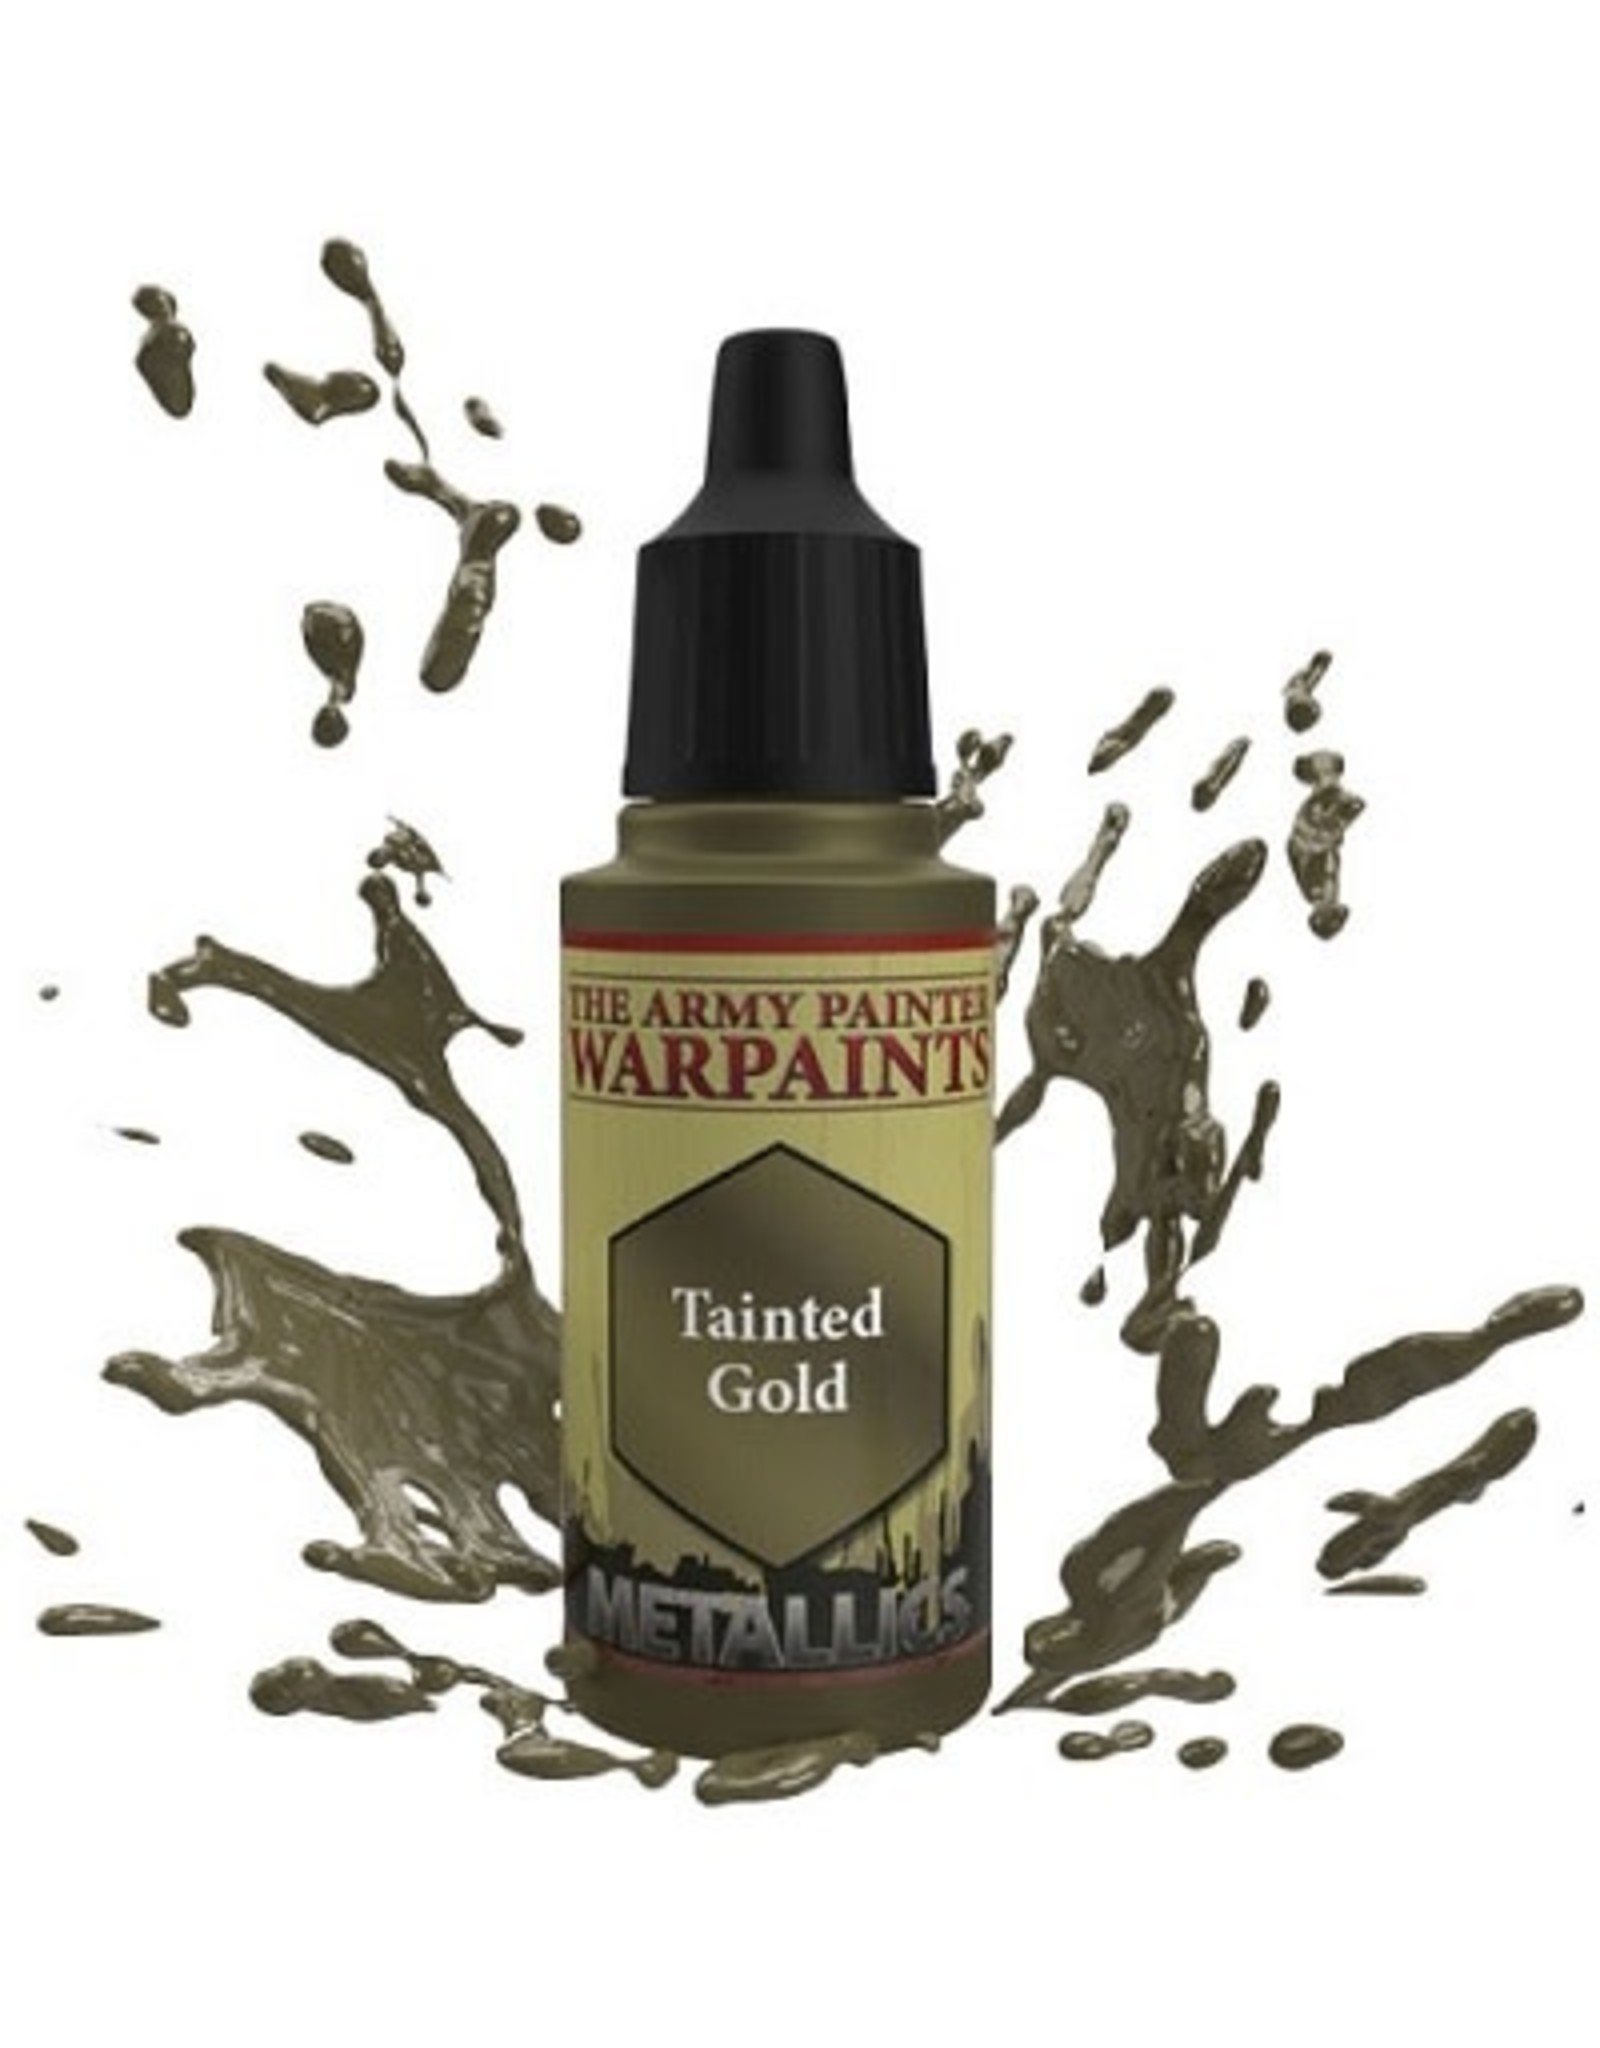 The Army Painter Warpaint: Metallics - Tainted Gold (18ml)